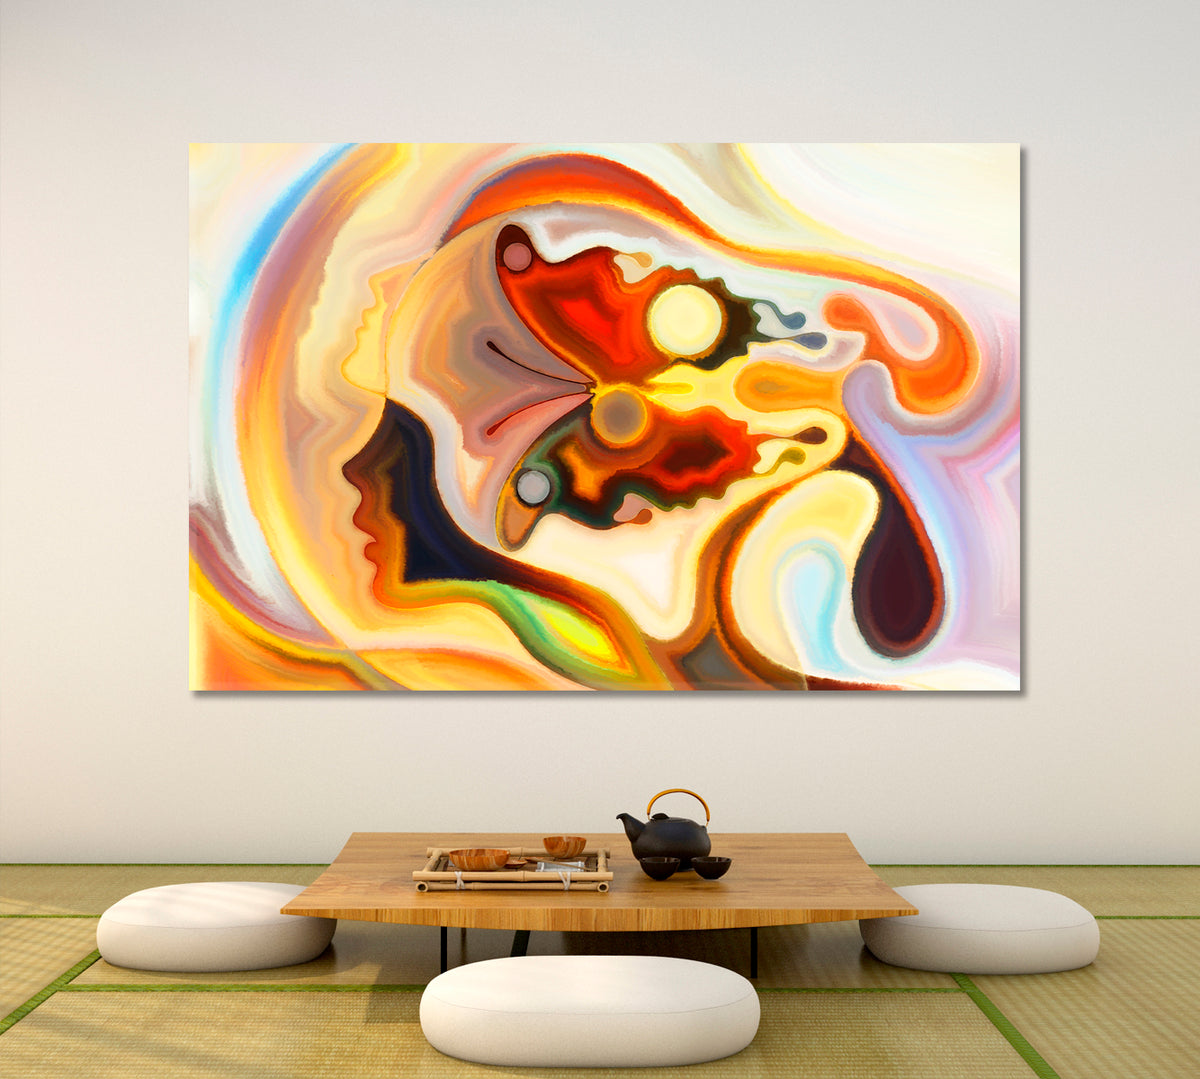 Ego and Nature Abstract Allegory Contemporary Art Artesty 1 panel 24" x 16" 